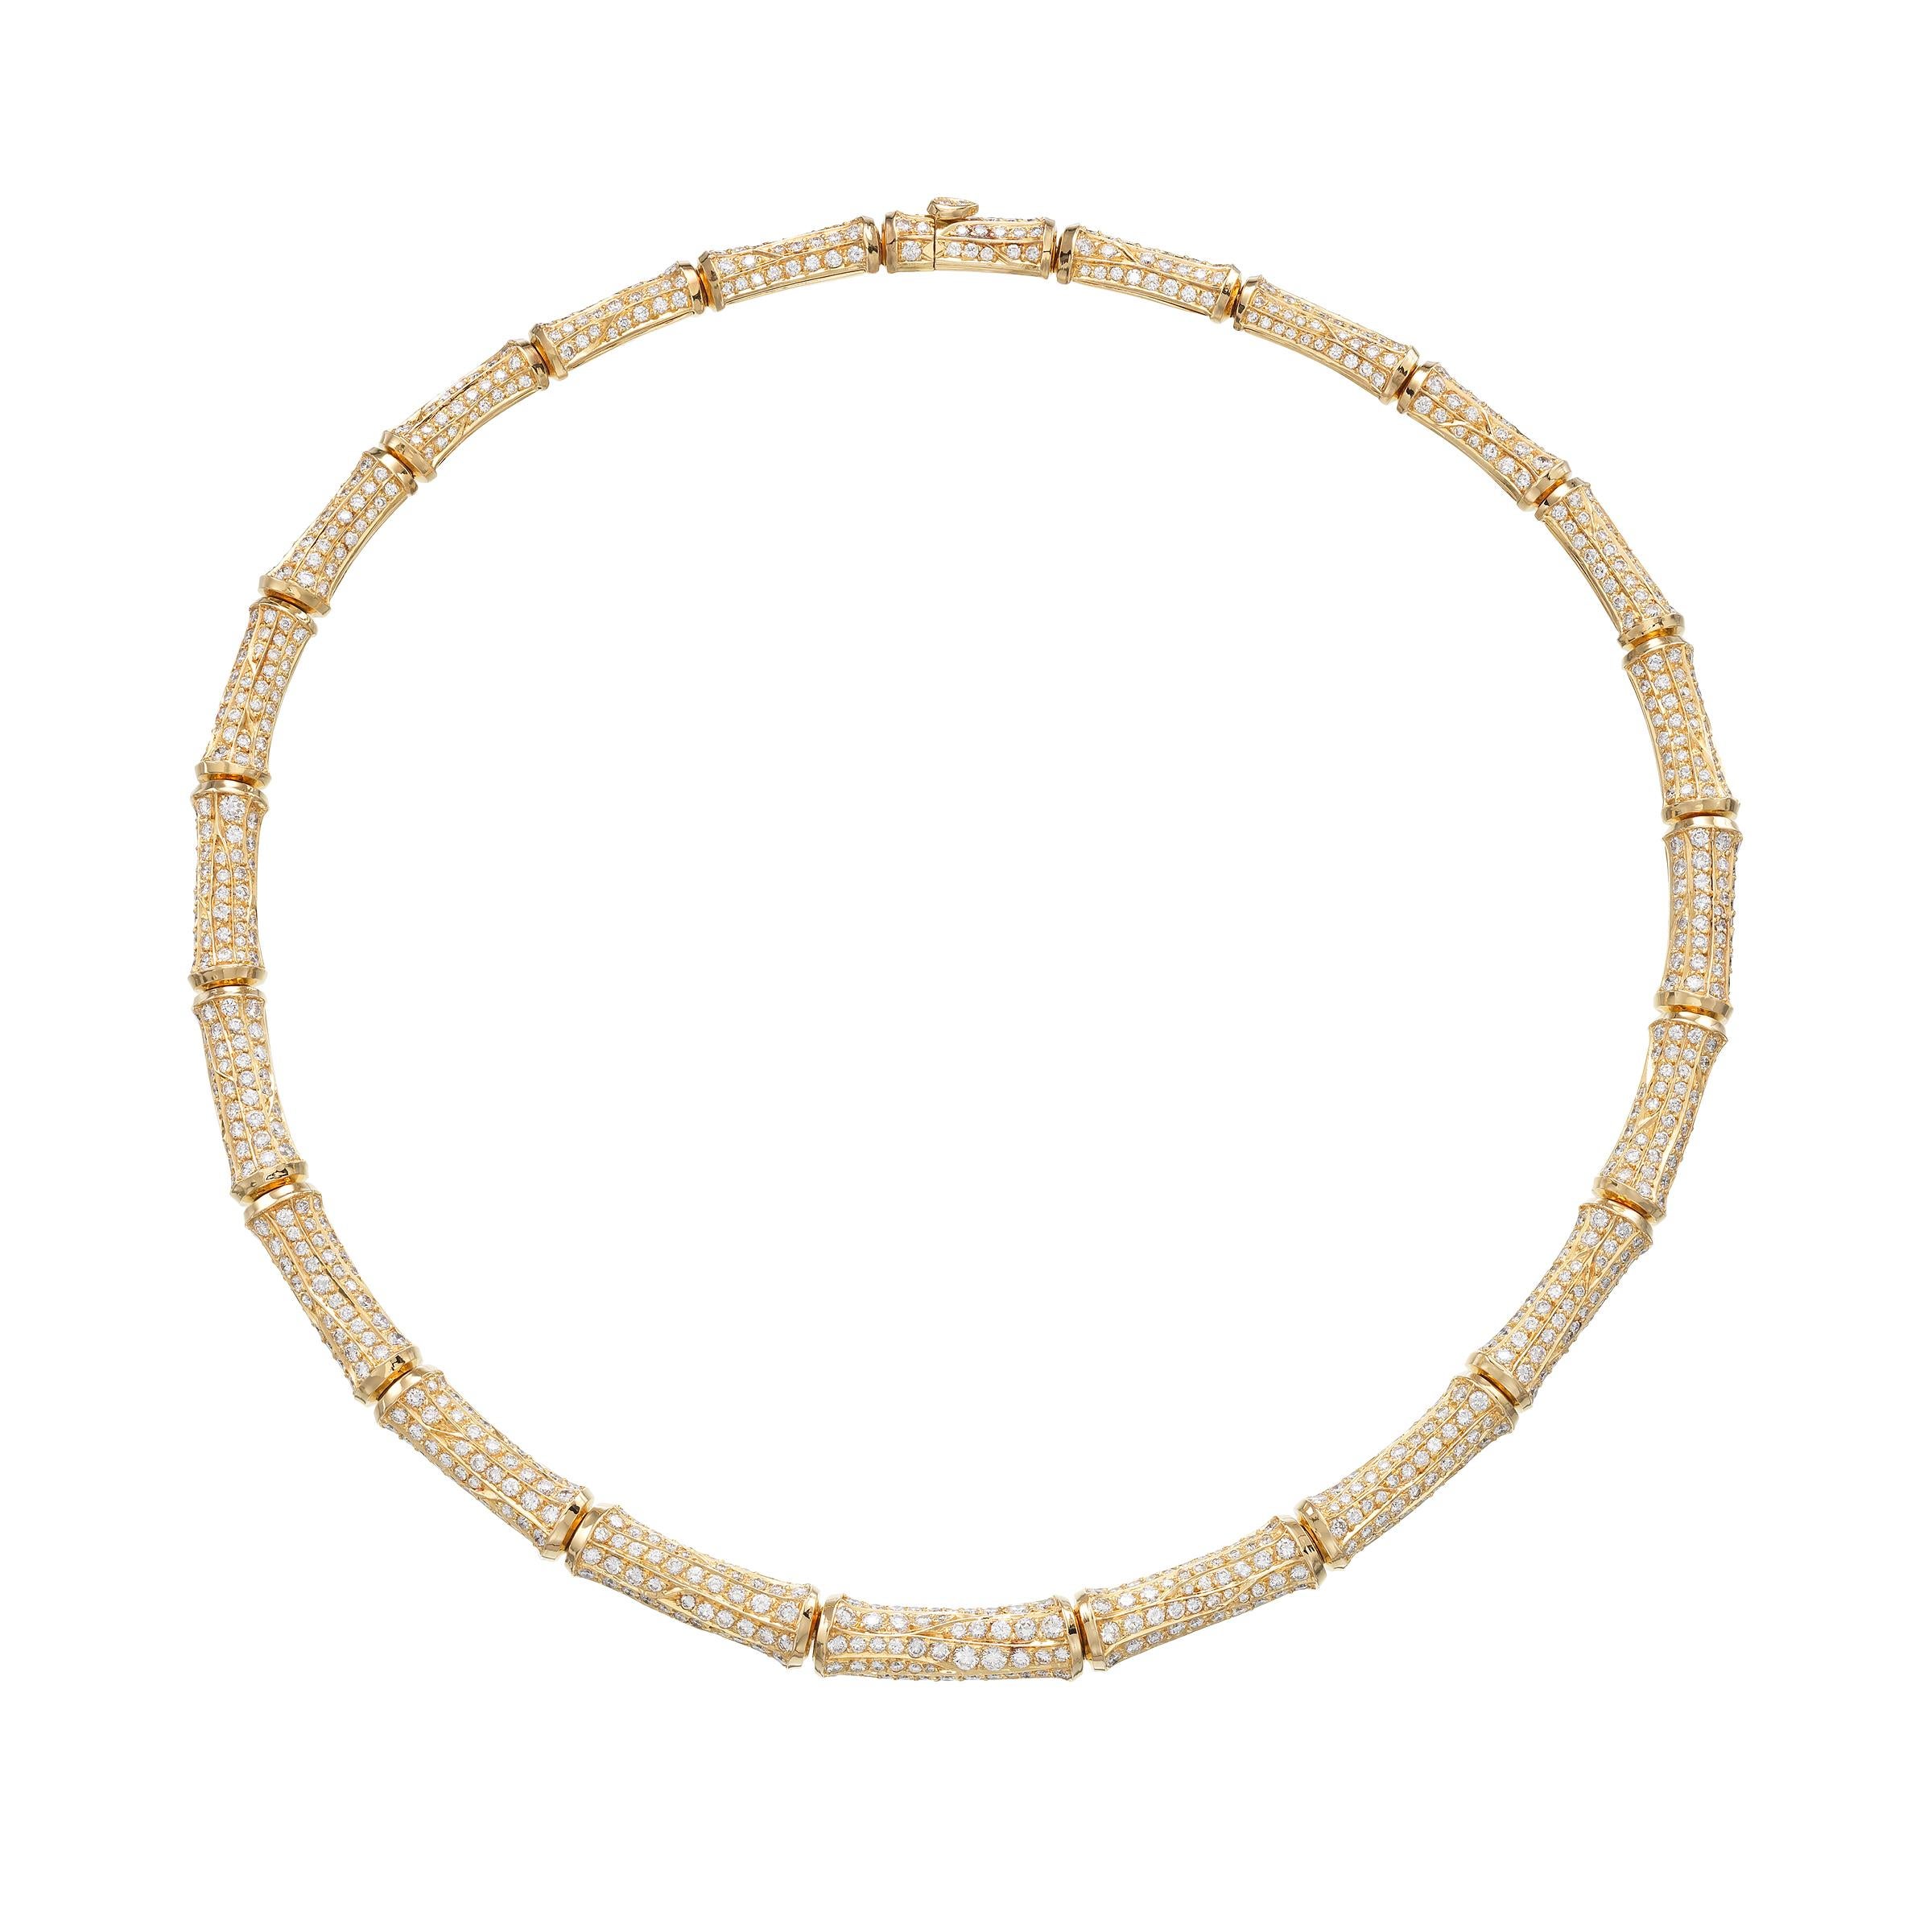 Cartier 26cts Diamond Bamboo Suite in 18K Gold Necklace and 